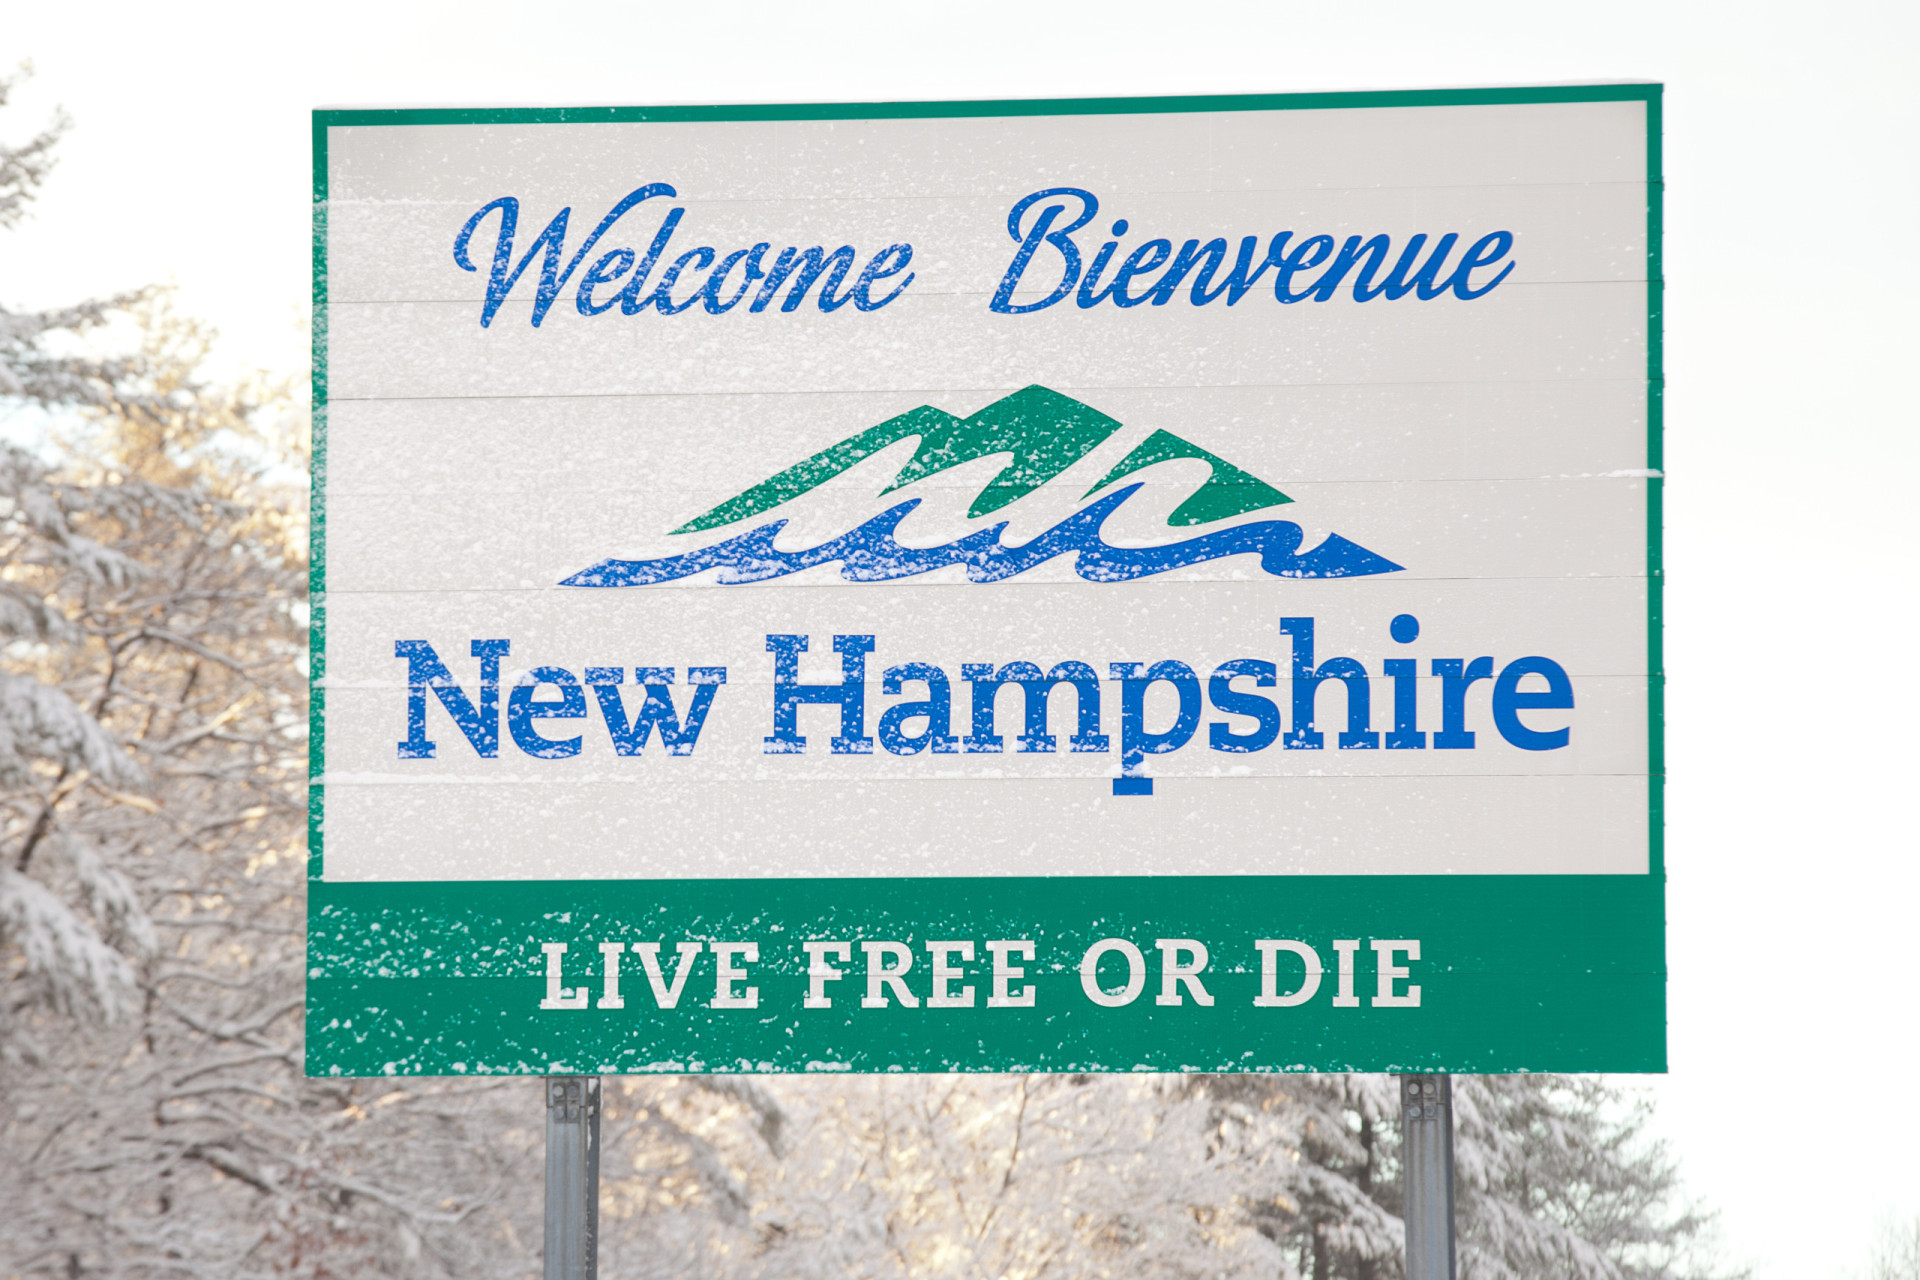 <p>One of the 13 colonies to declare independence from England, New Hampshire emphasizes the importance of freedom in its sign. The French <em>Bienvenue</em> is aimed at the many Canadians who visit the state.</p><p><a href="https://www.msn.com/en-us/community/channel/vid-7xx8mnucu55yw63we9va2gwr7uihbxwc68fxqp25x6tg4ftibpra?cvid=94631541bc0f4f89bfd59158d696ad7e">Follow us and access great exclusive content every day</a></p>